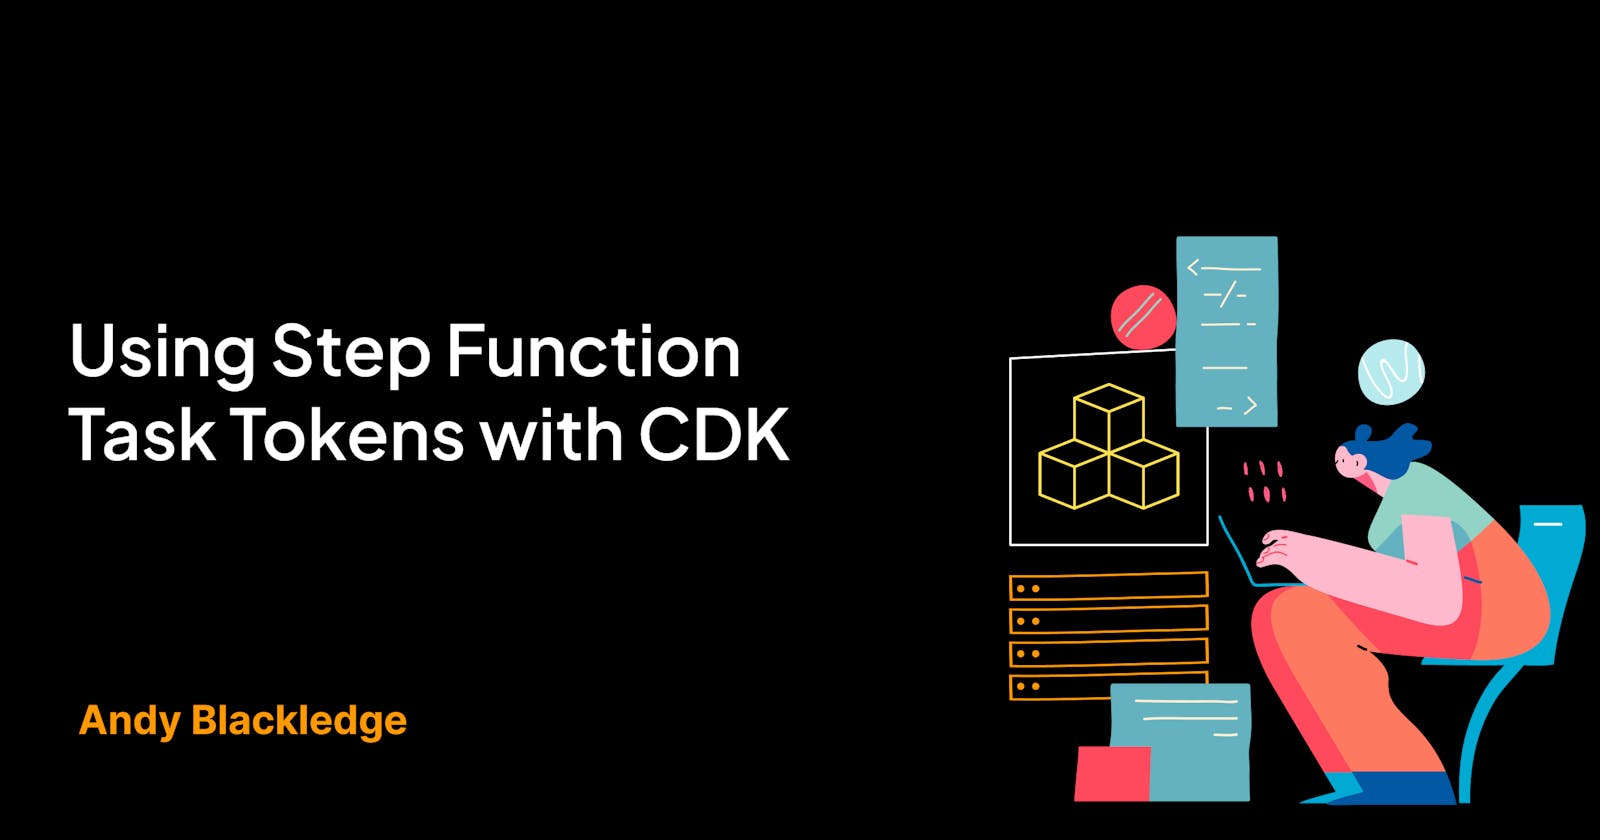 Using Step Function Task Tokens with CDK